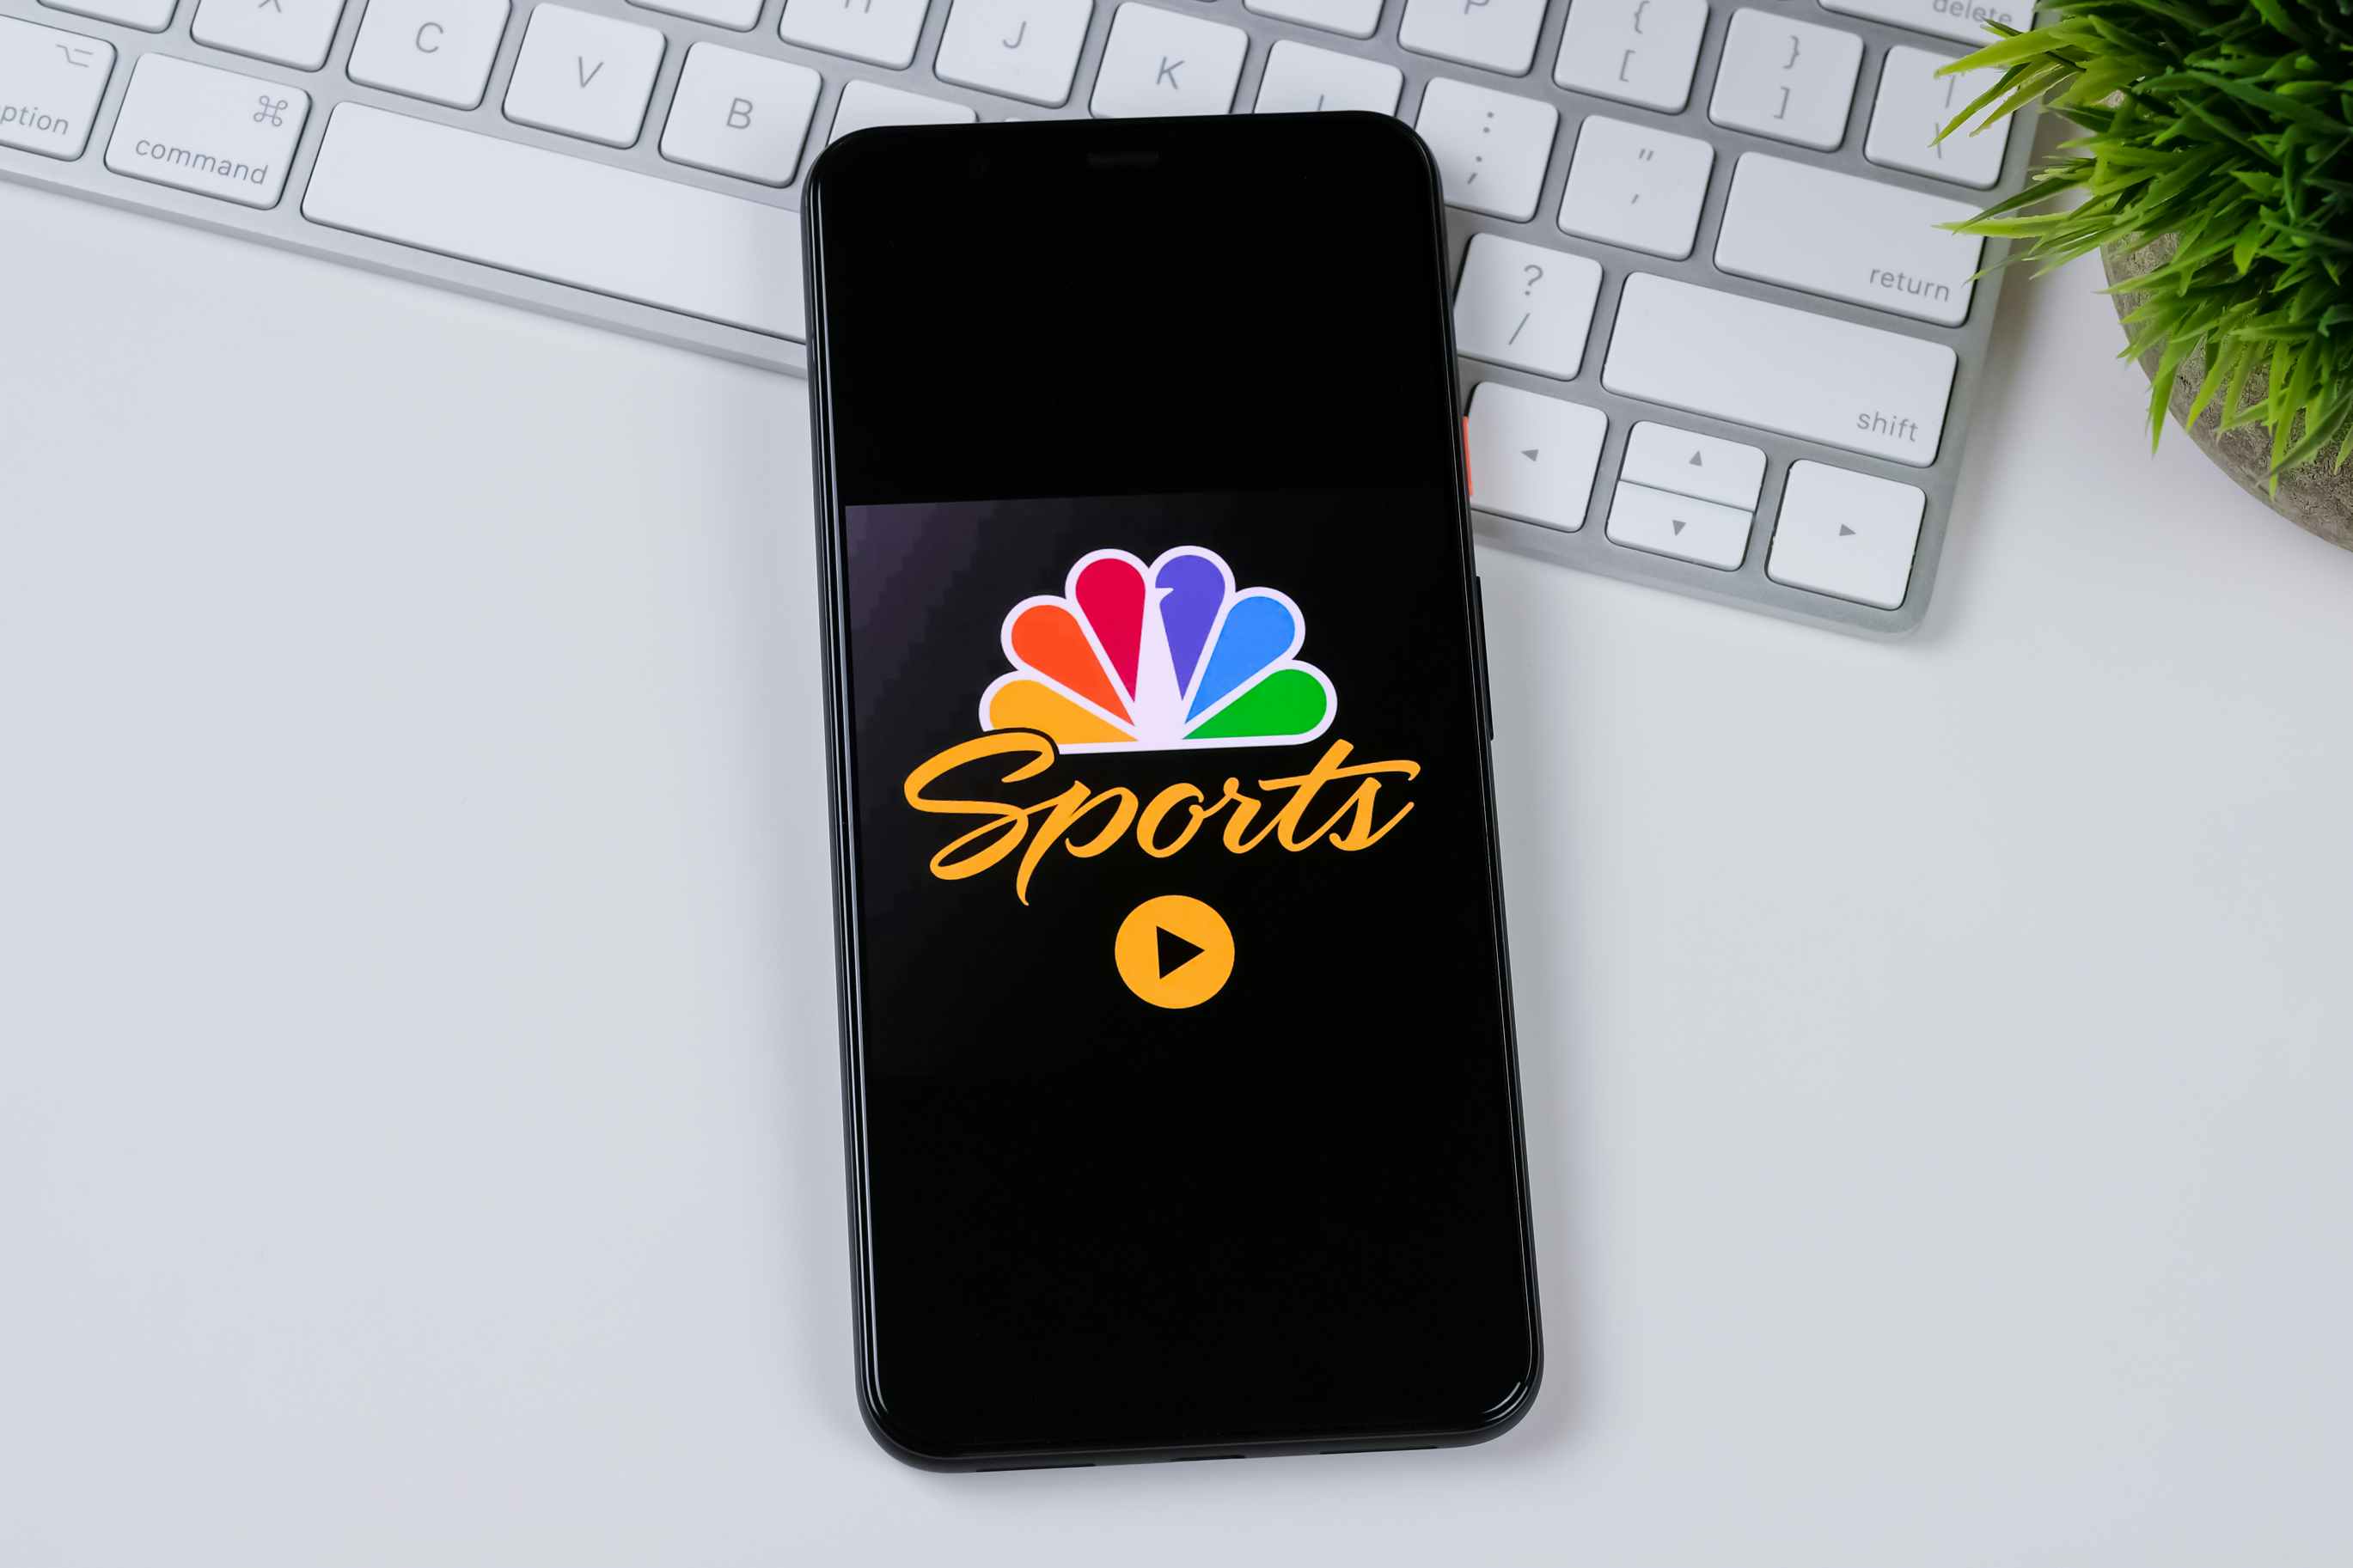 NBC sports on iphone on a computer desk